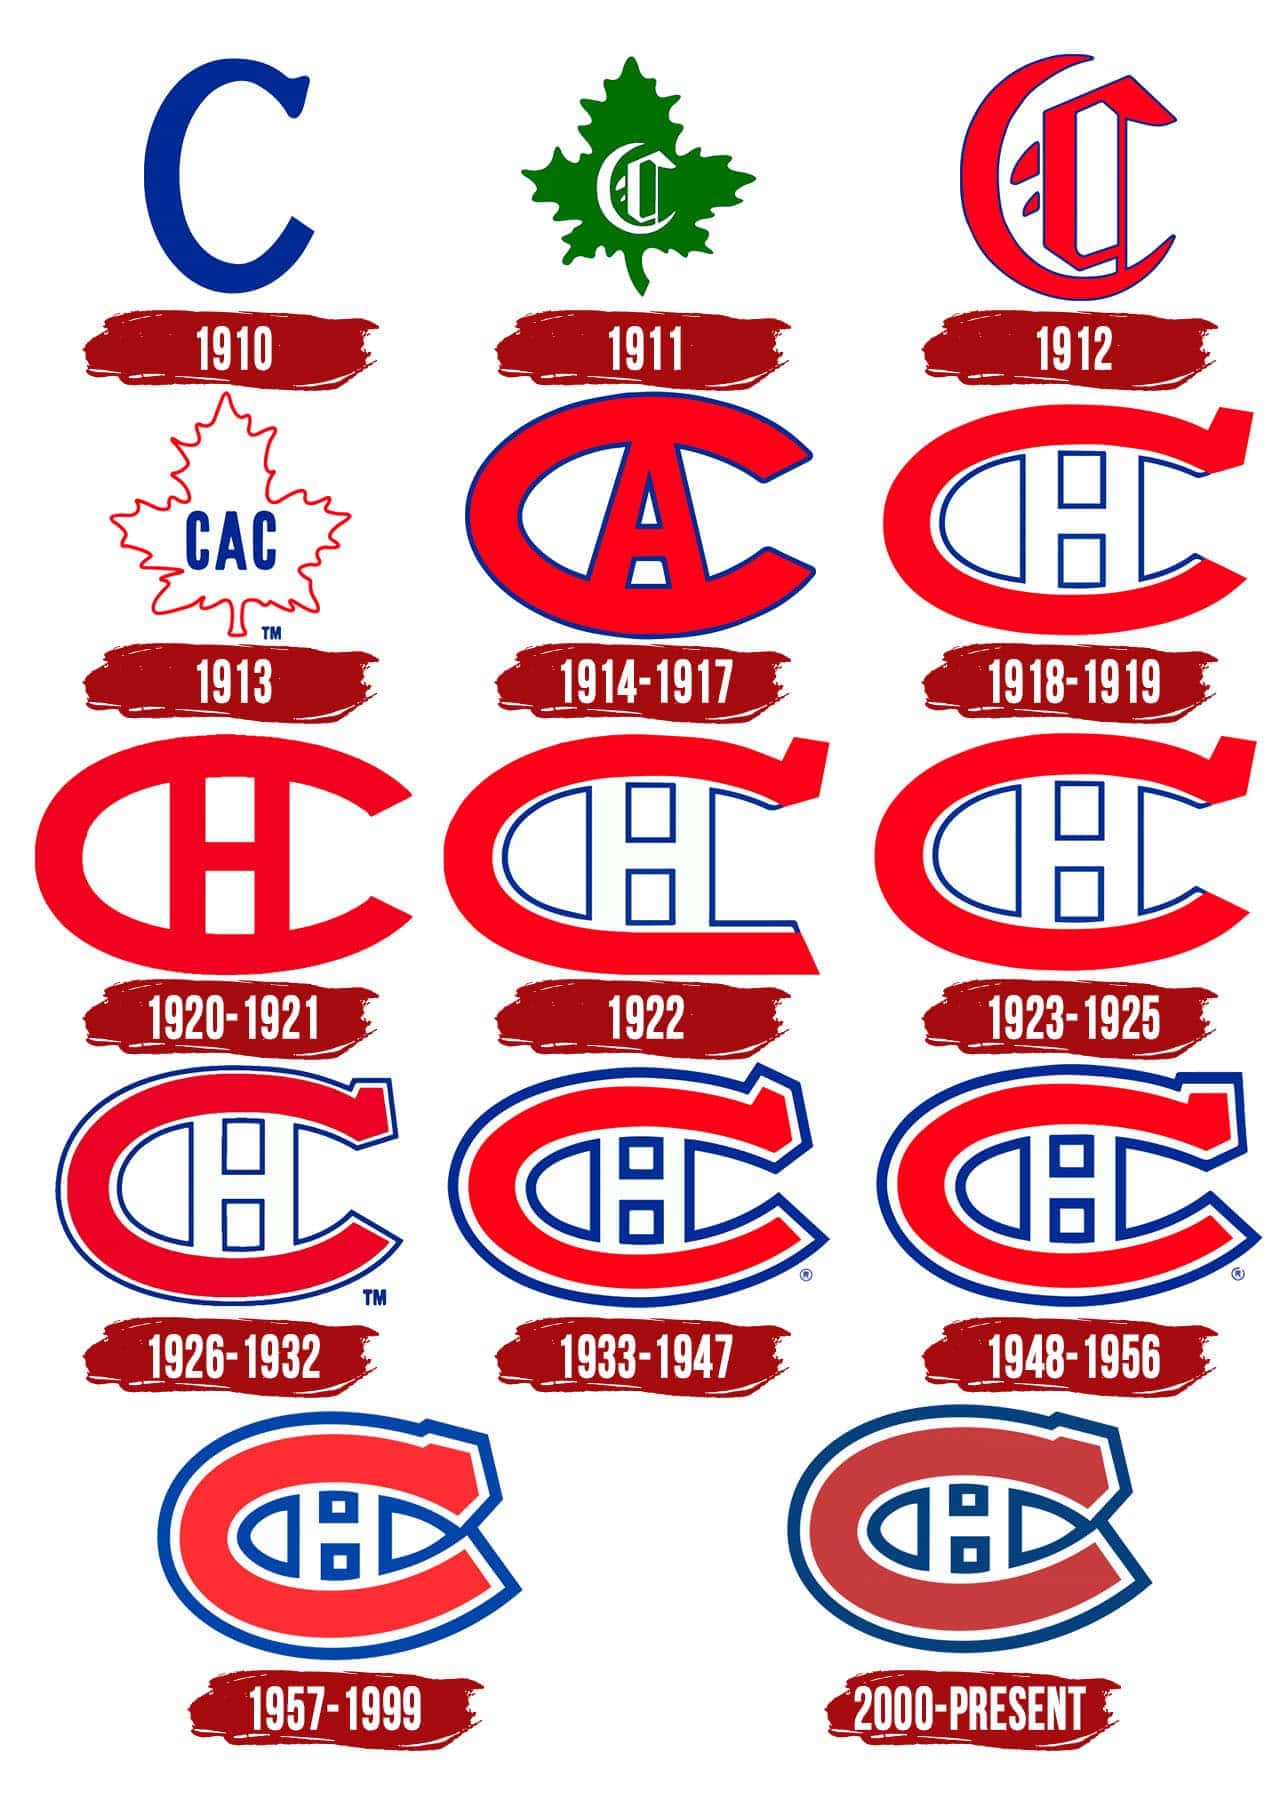 Montreal Canadiens Logo The Most Famous Brands And Company Logos In The World